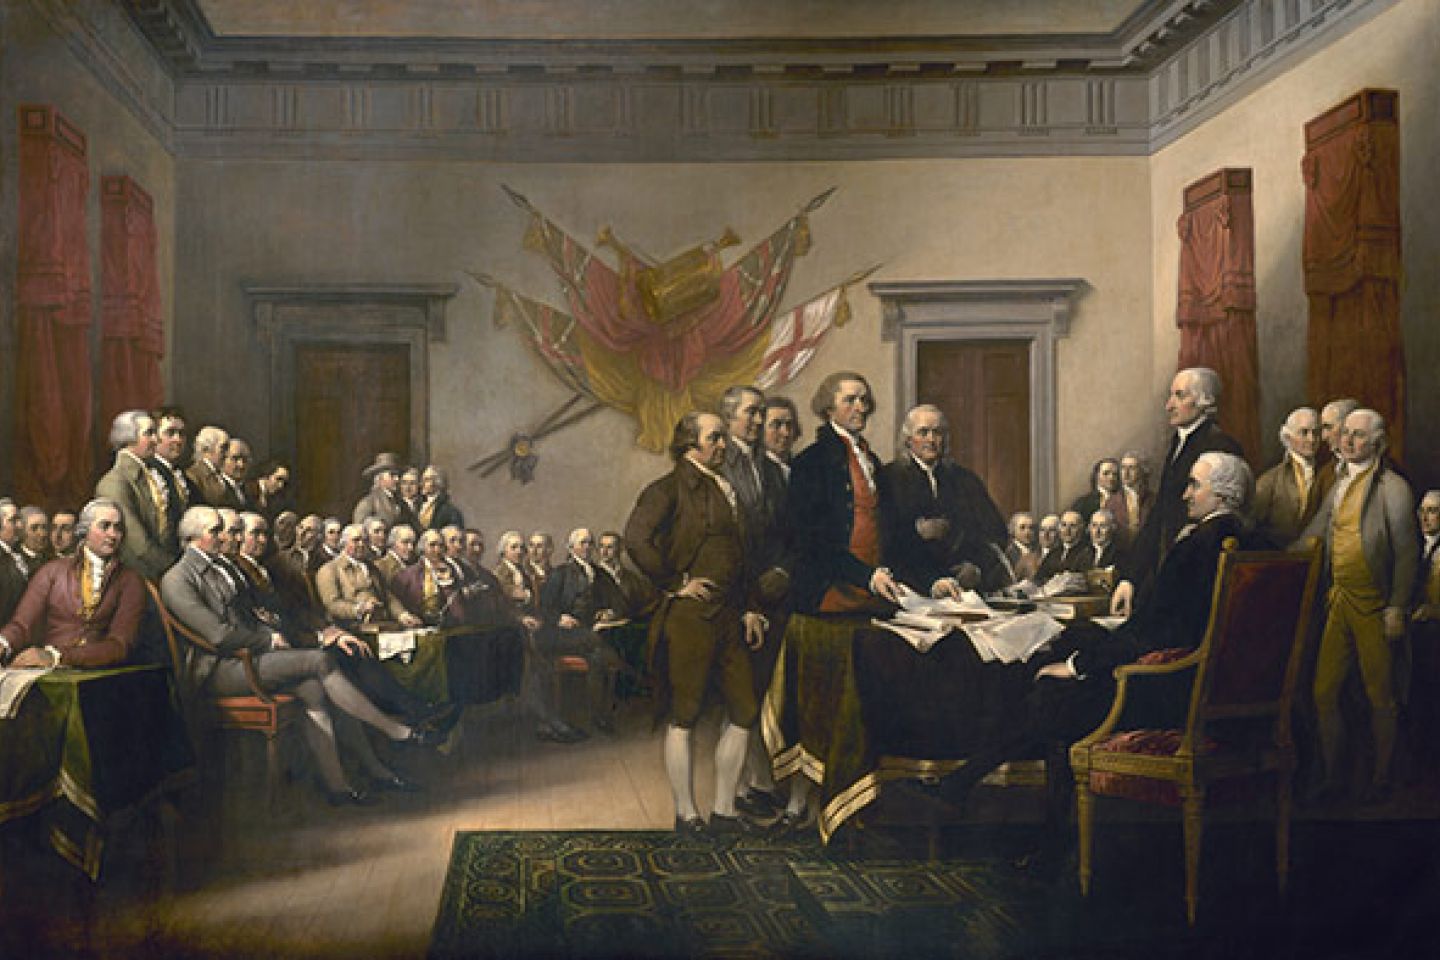 The signing of the Declaration of Independence.